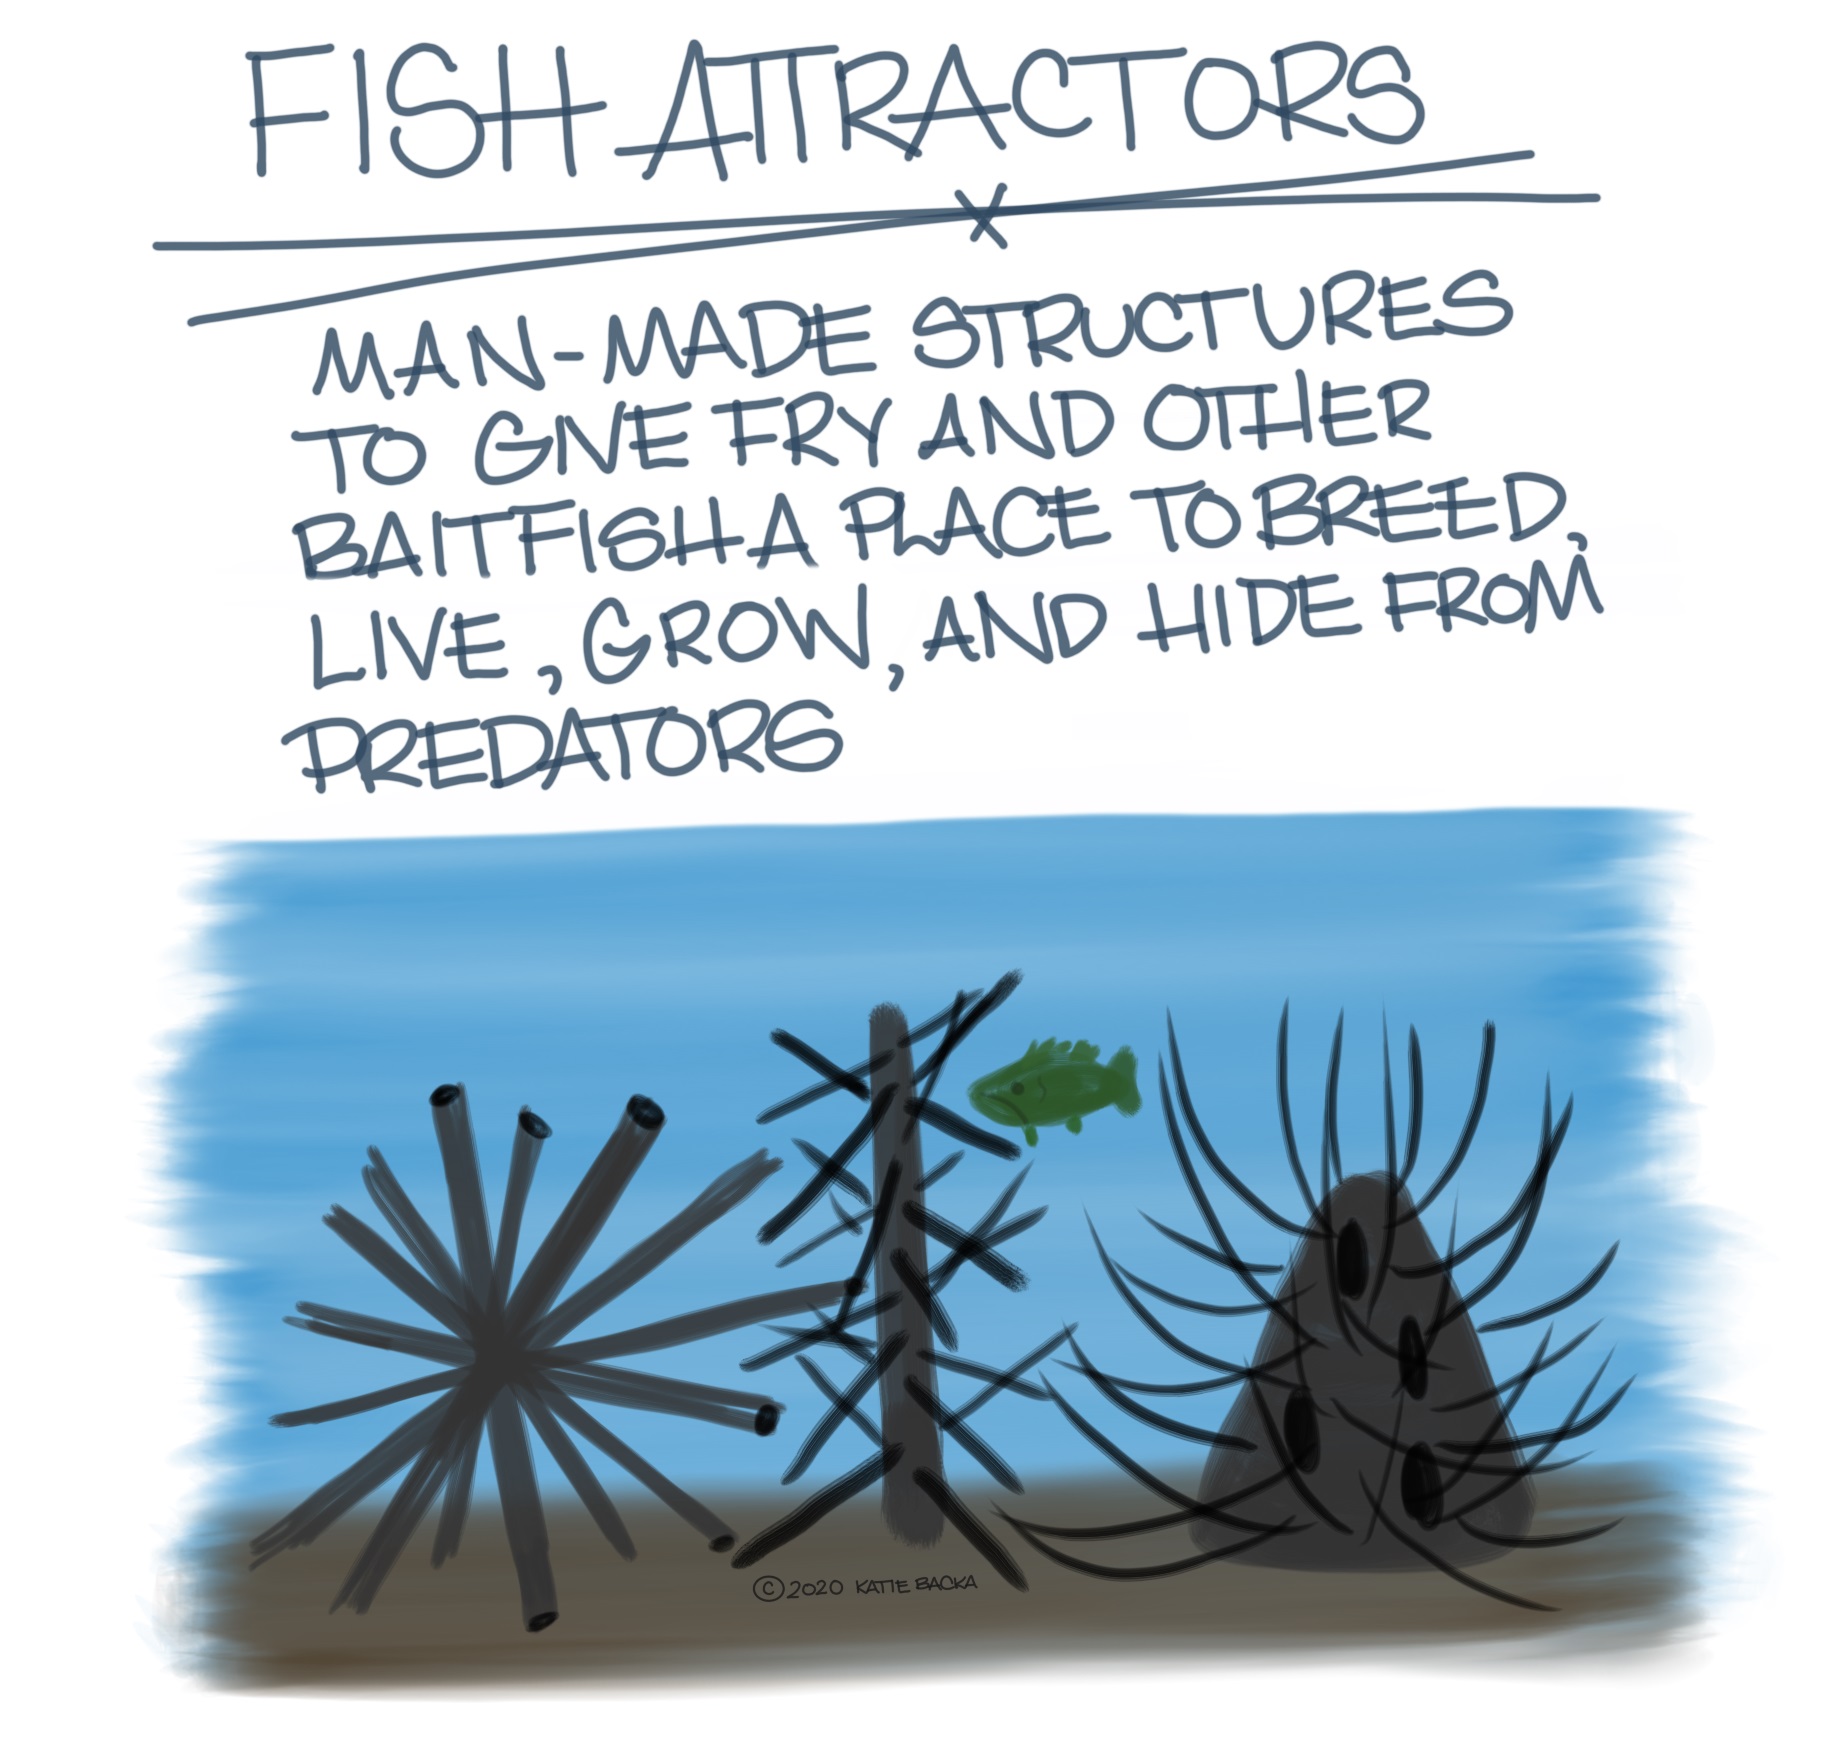 Script: Fish attractors, man-made structures to give fry and other baitfish a place to breed, live, grow, and hide from predators